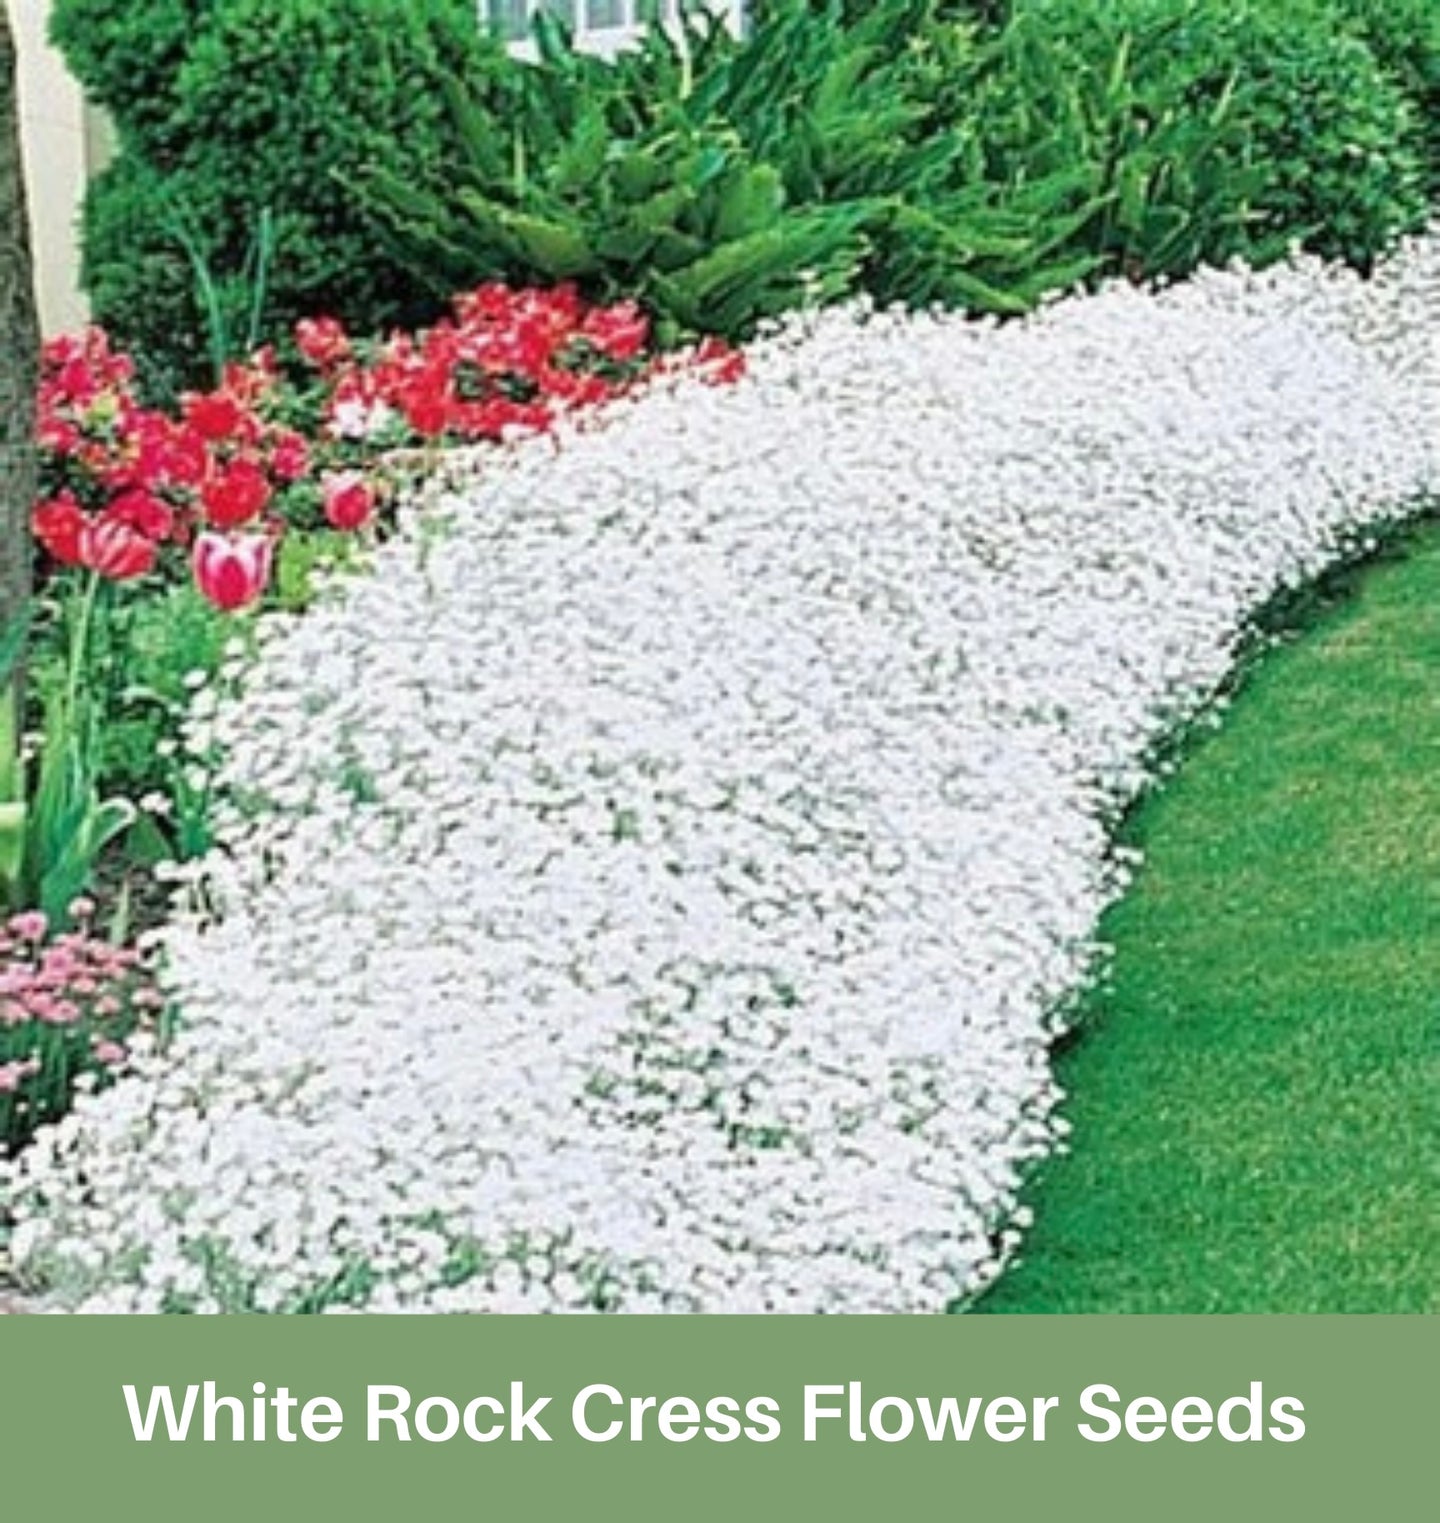 White Rock Cress Flower Seeds, Ground Cover,